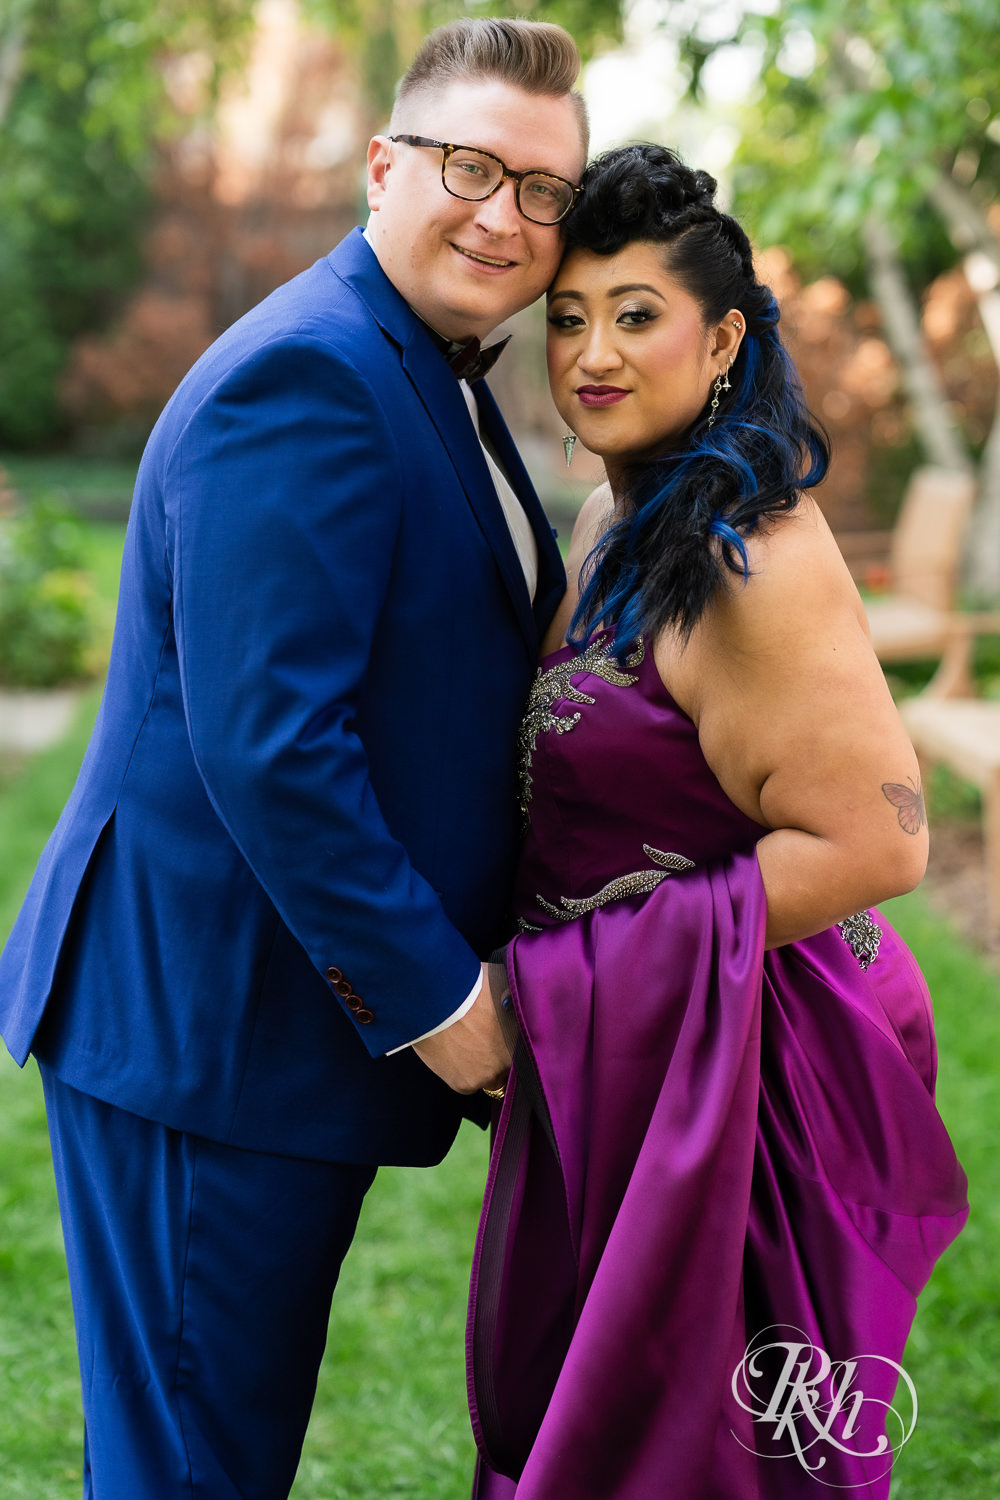 Filipino bride with mohawk dressed in purple wedding dress and groom smile at American Swedish Institute in Minnesota.